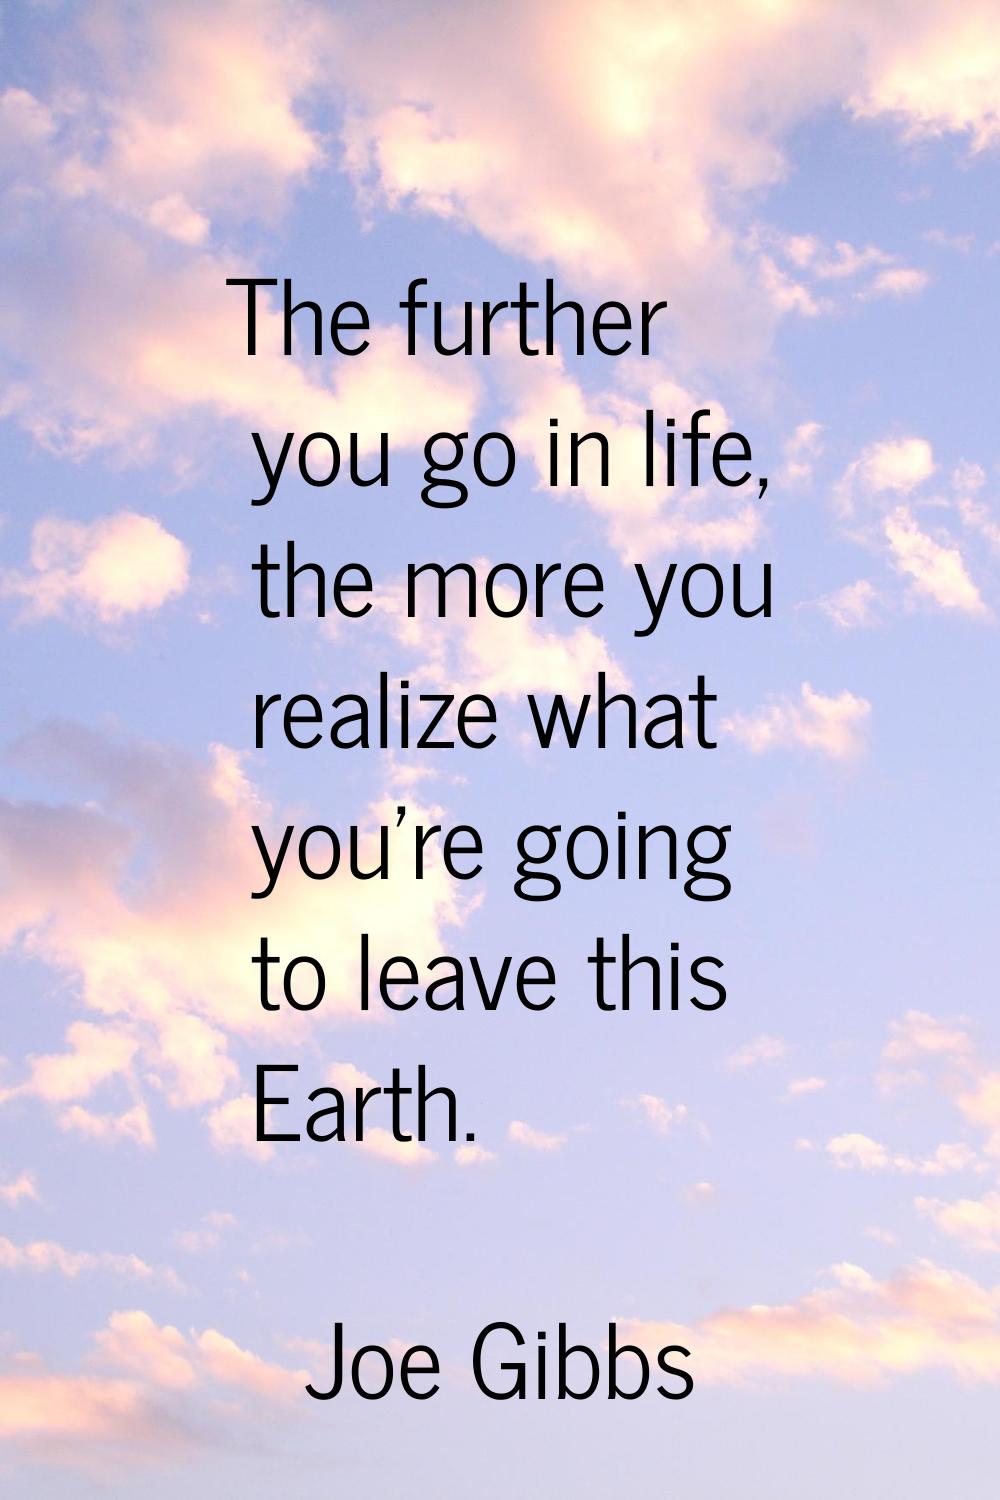 The further you go in life, the more you realize what you're going to leave this Earth.